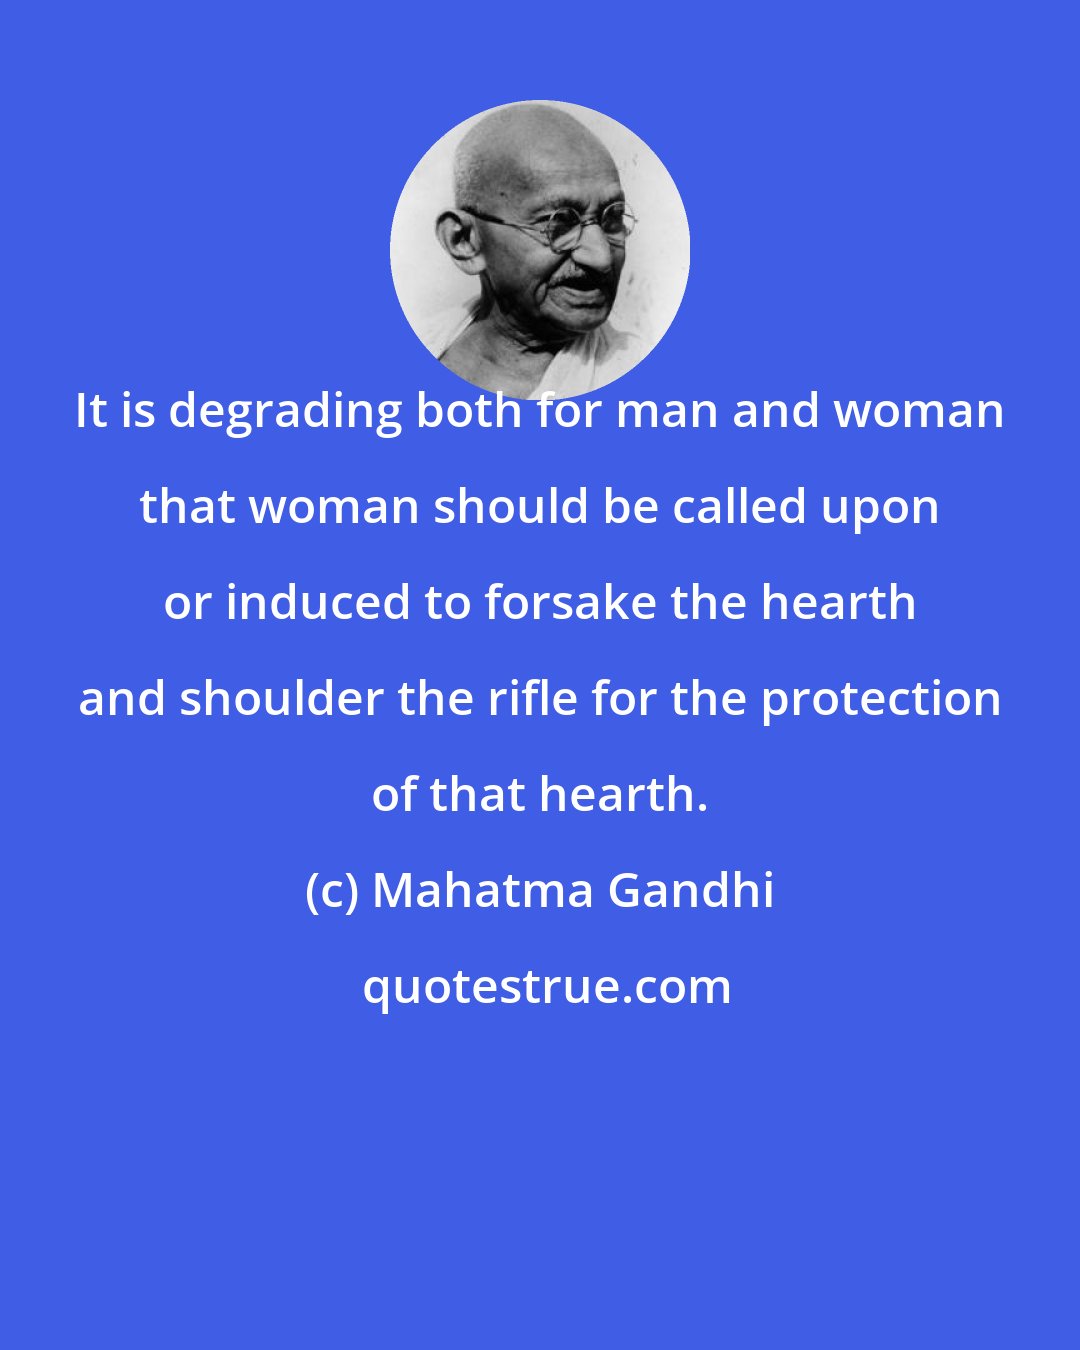 Mahatma Gandhi: It is degrading both for man and woman that woman should be called upon or induced to forsake the hearth and shoulder the rifle for the protection of that hearth.